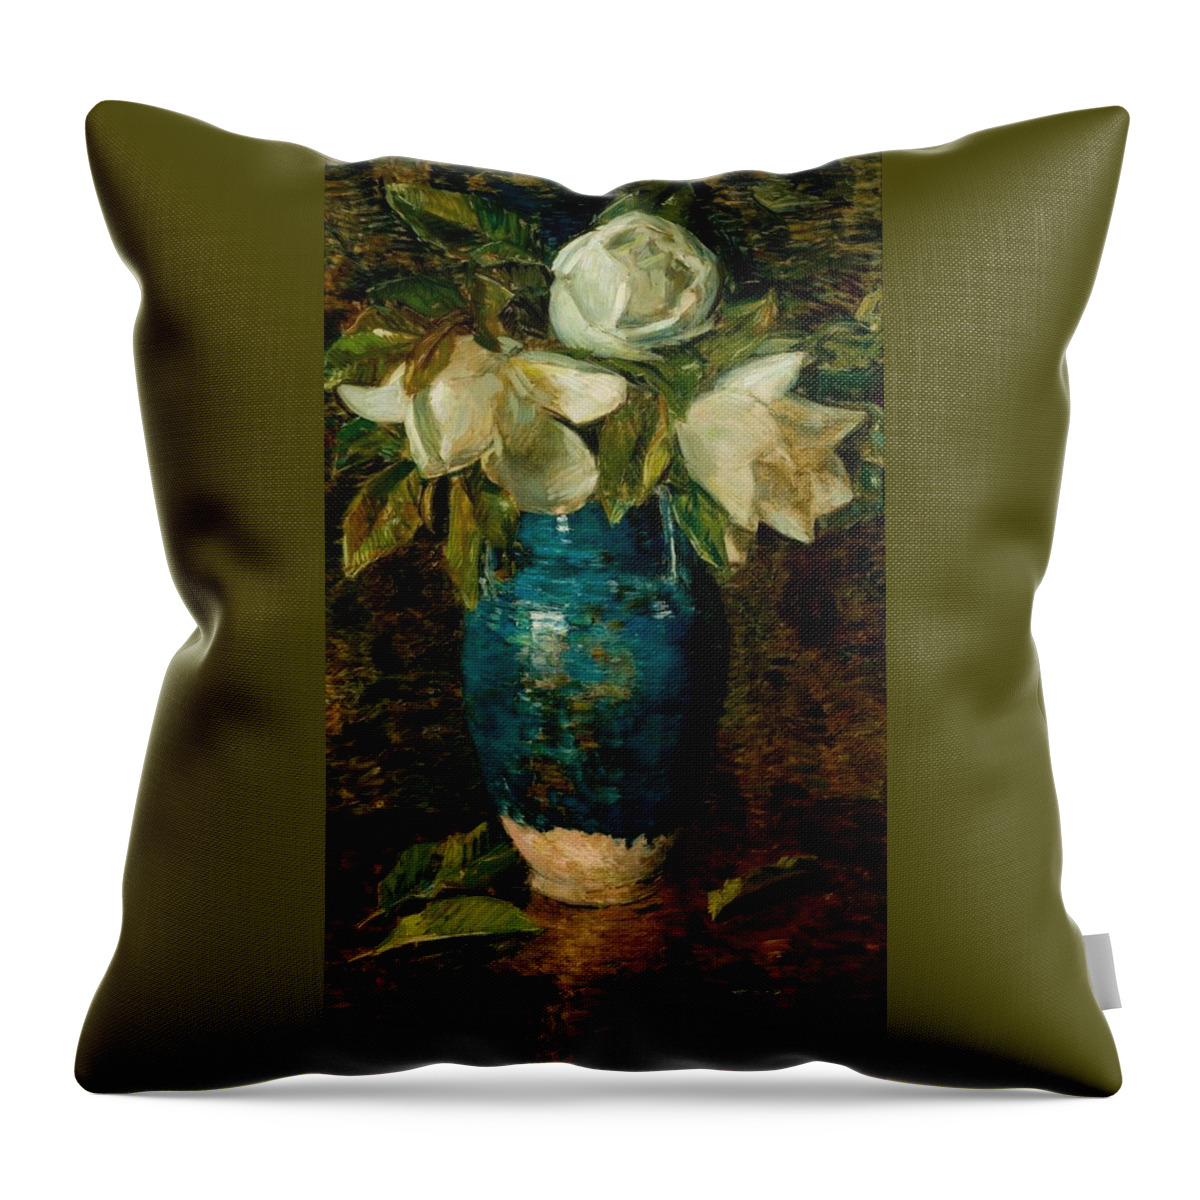 Giant Magnolias Throw Pillow featuring the painting Childe Hassam by Giant Magnolias